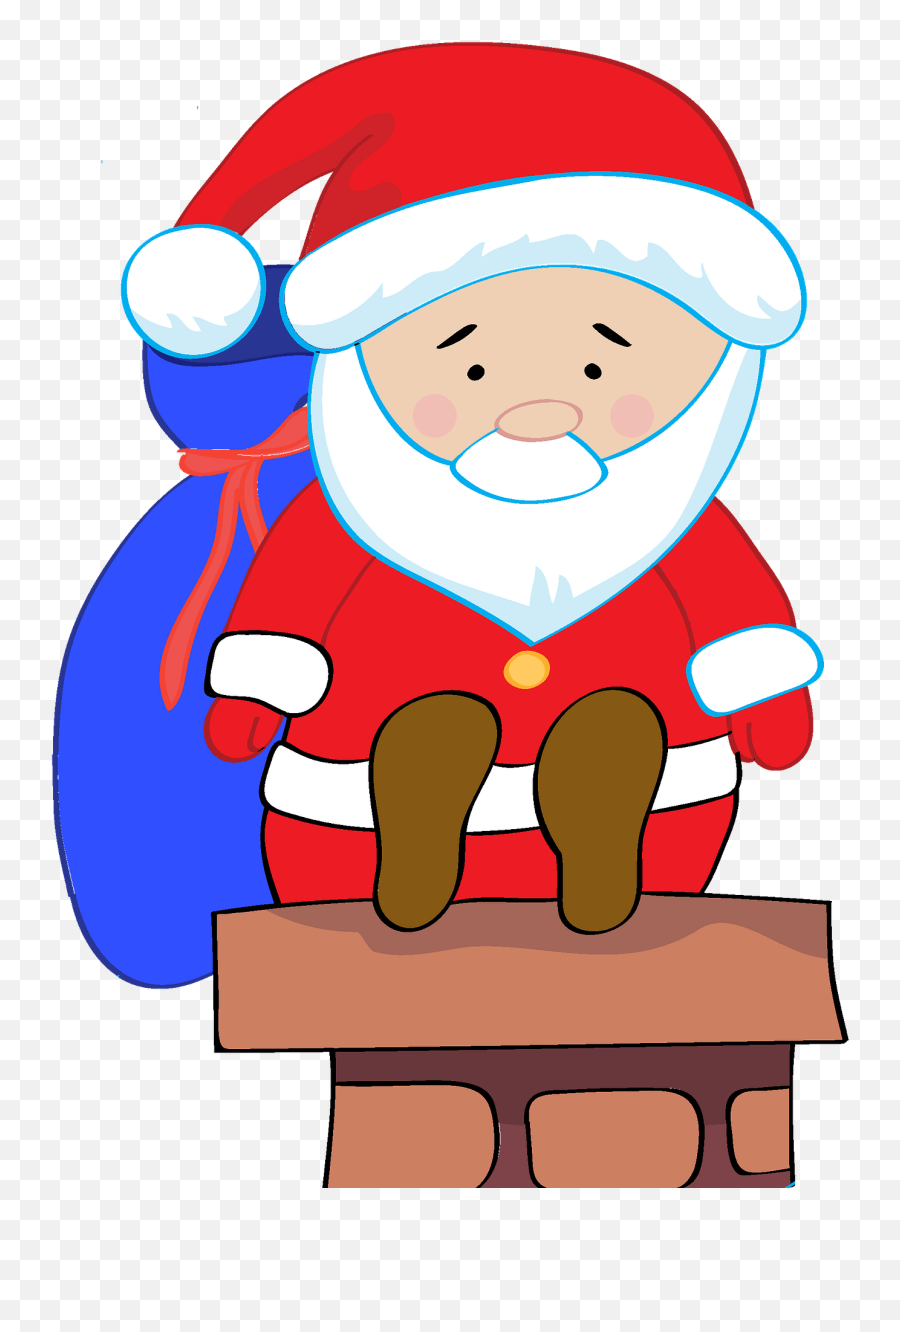 Santa Claus On A Chimney Clipart Free Download Transparent - Santa Claus Emoji,Chimney Clipart